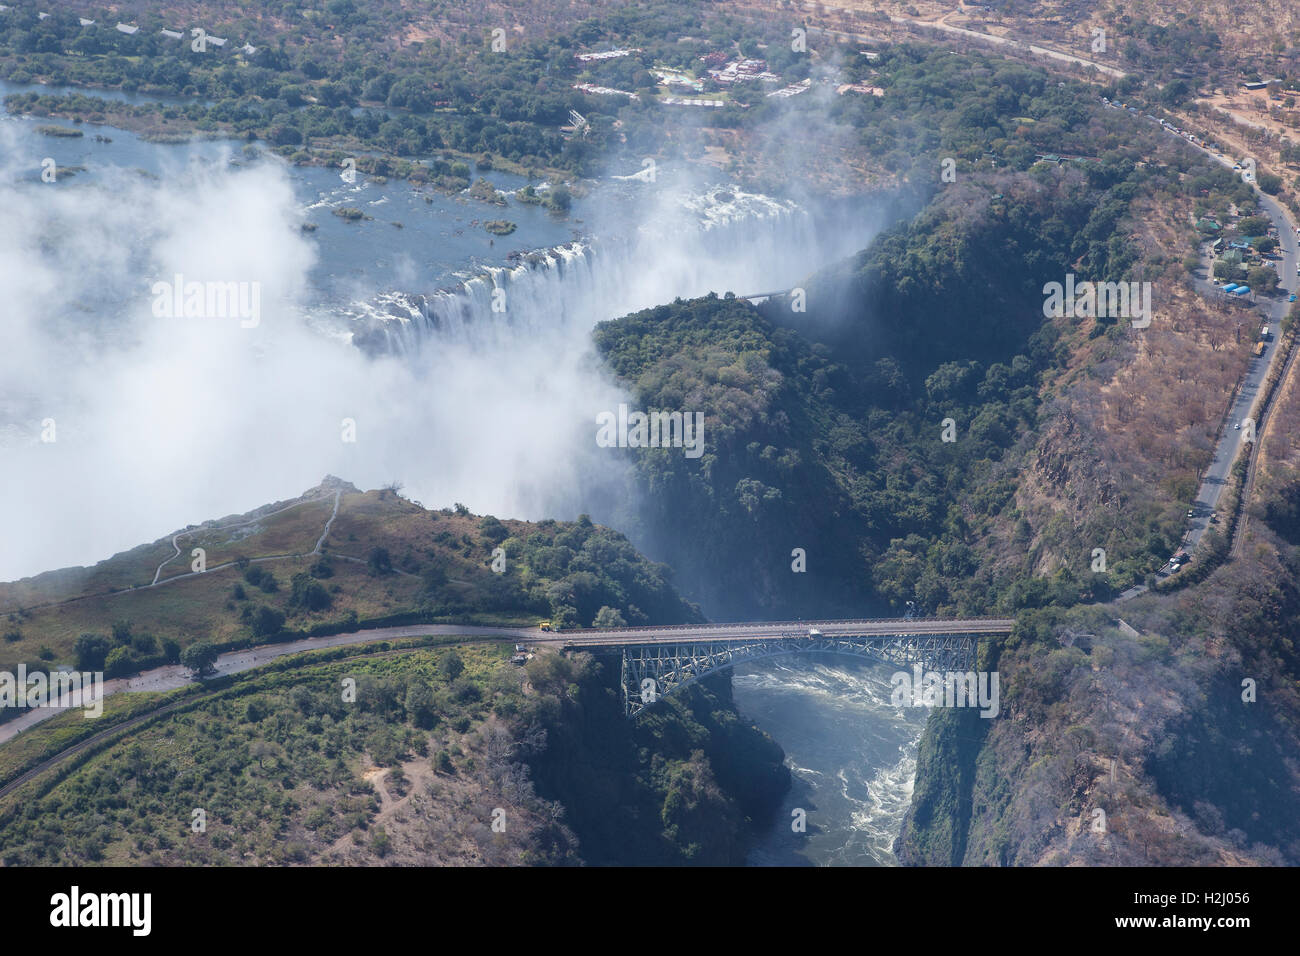 Aerial view of the Victoria Falls showing  the gorge that divides Zambia from Zimbabwe and Zambezi river that plunges into it Stock Photo